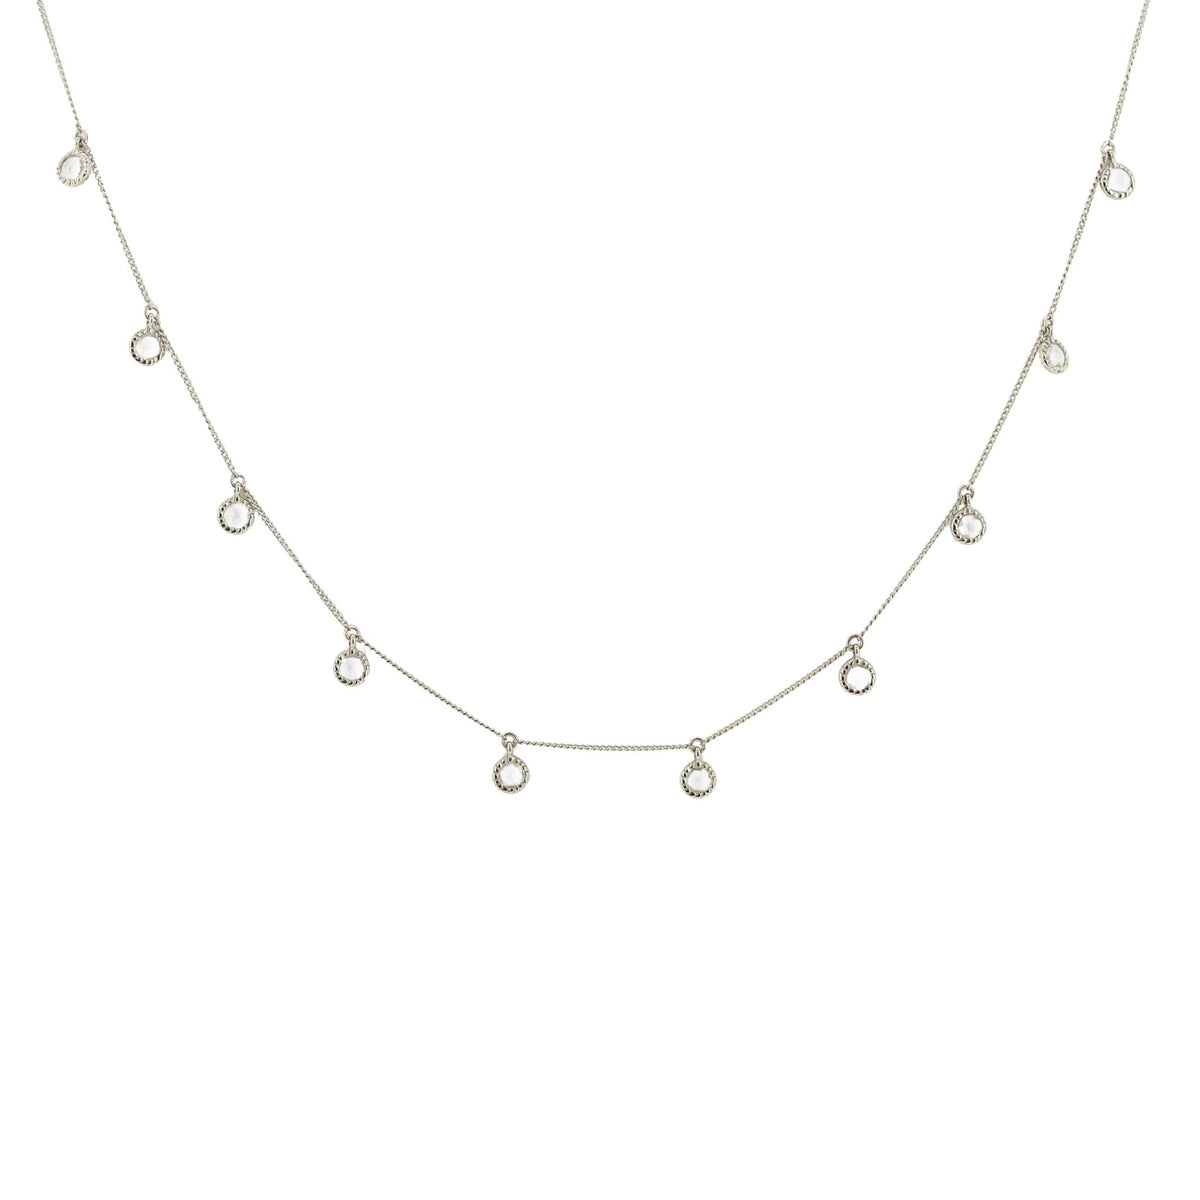 DAINTY LEGACY COLLAR NECKLACE - WHITE TOPAZ &amp; SILVER - SO PRETTY CARA COTTER